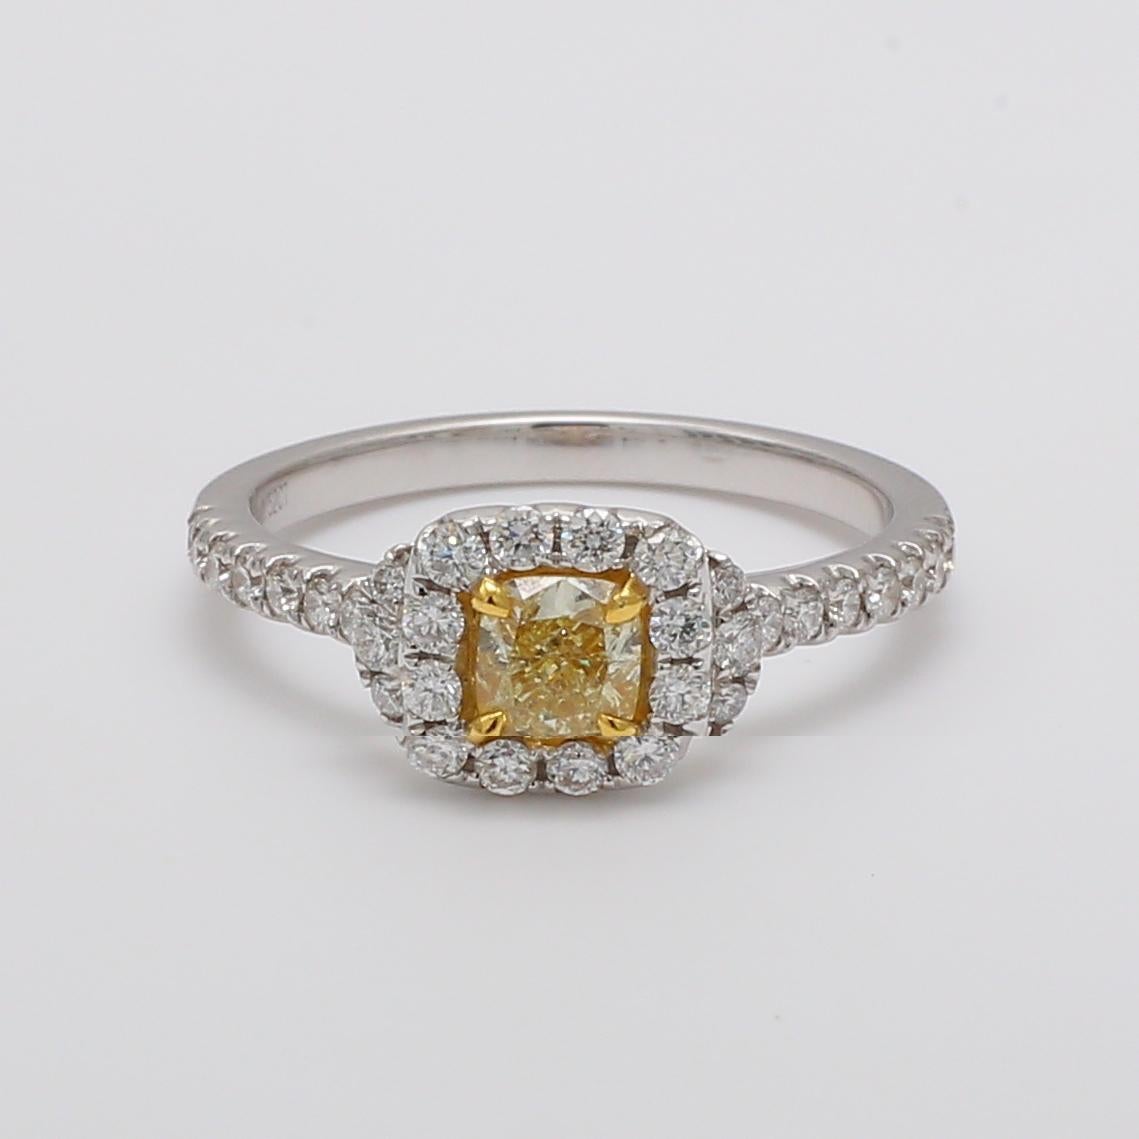 Rare square cushion natural yellow diamond surrounded with natural round white diamonds. This ring is designed to be in a simple setting with a single array of diamonds as well as two three diamond semicircle surrounding the centerstone in addition